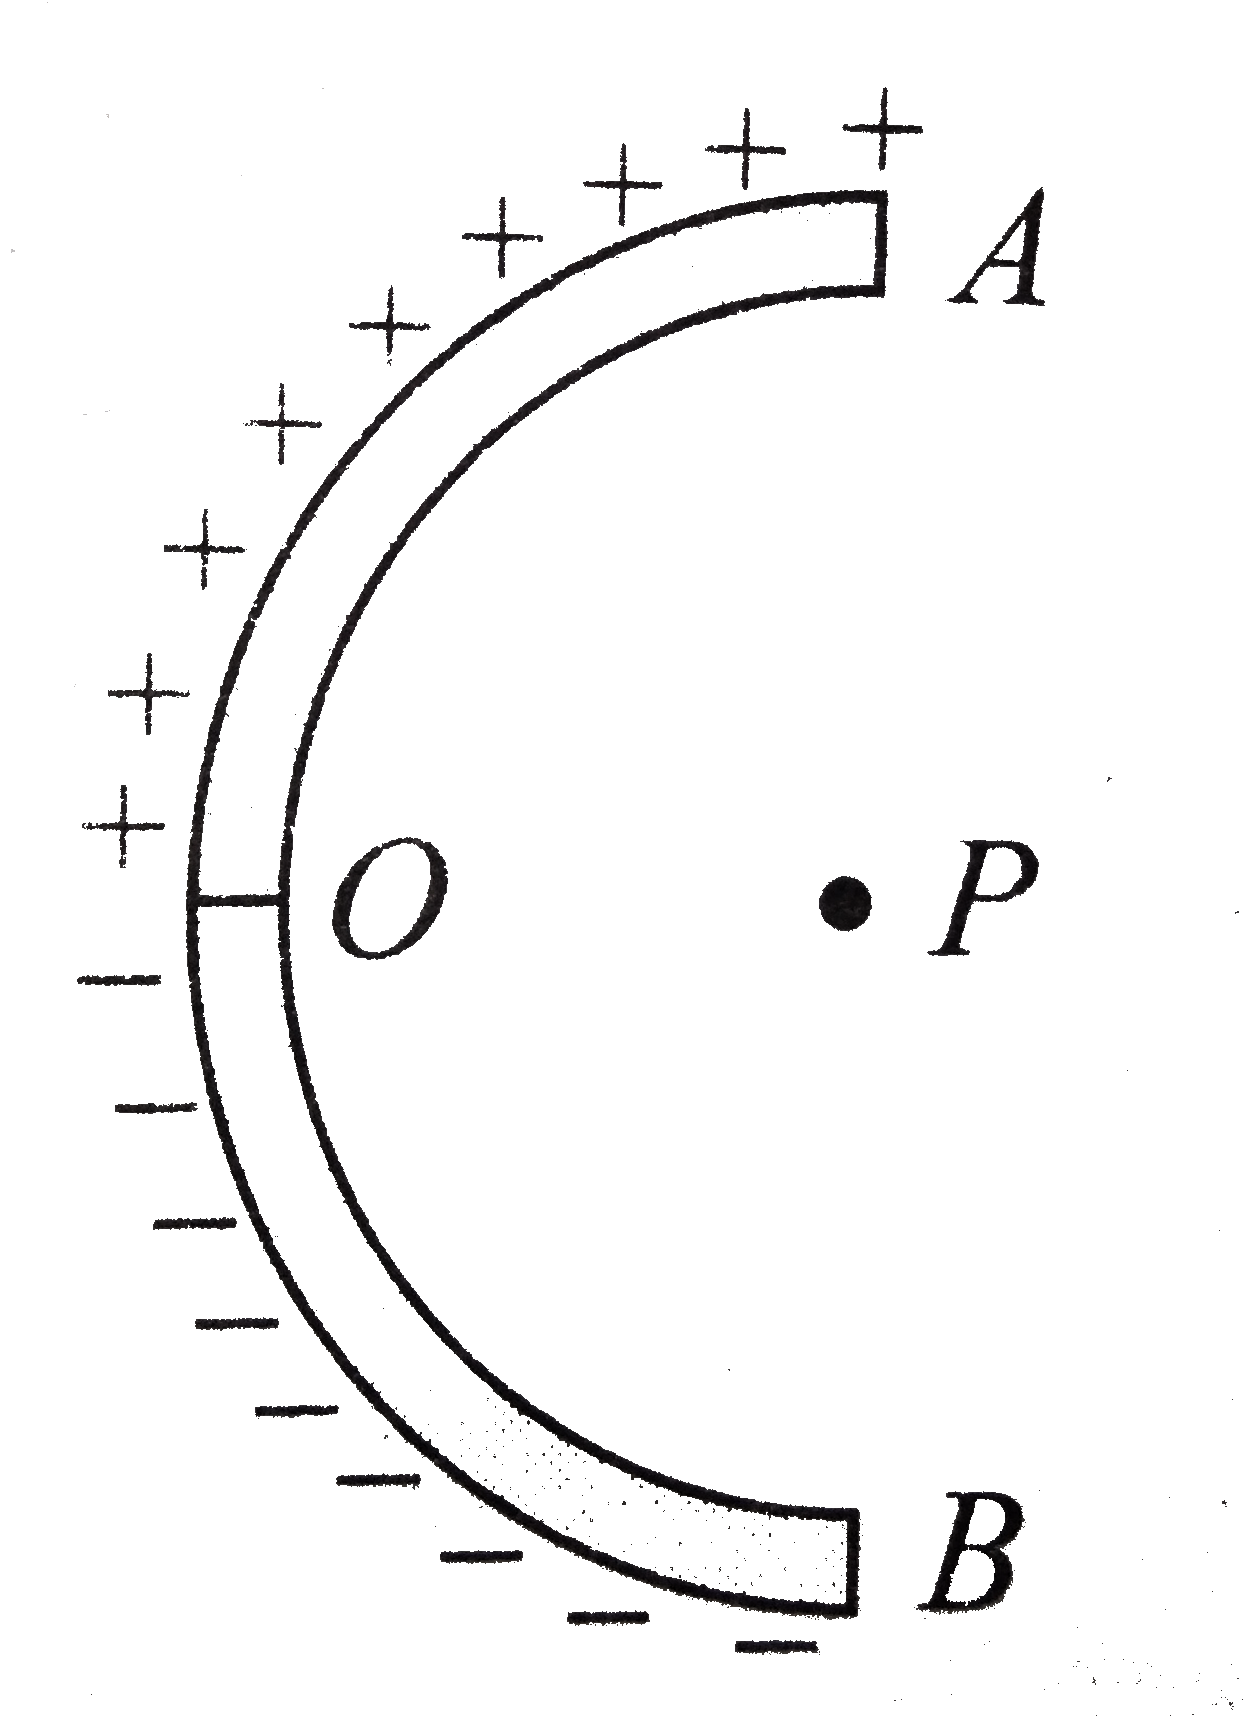 A thin glass rod is bent into a semicircle of radius r. A charge +Q is uniformly distributed along the lower half, as shown in fig. The electric field E at P, the center of the semicircle, is